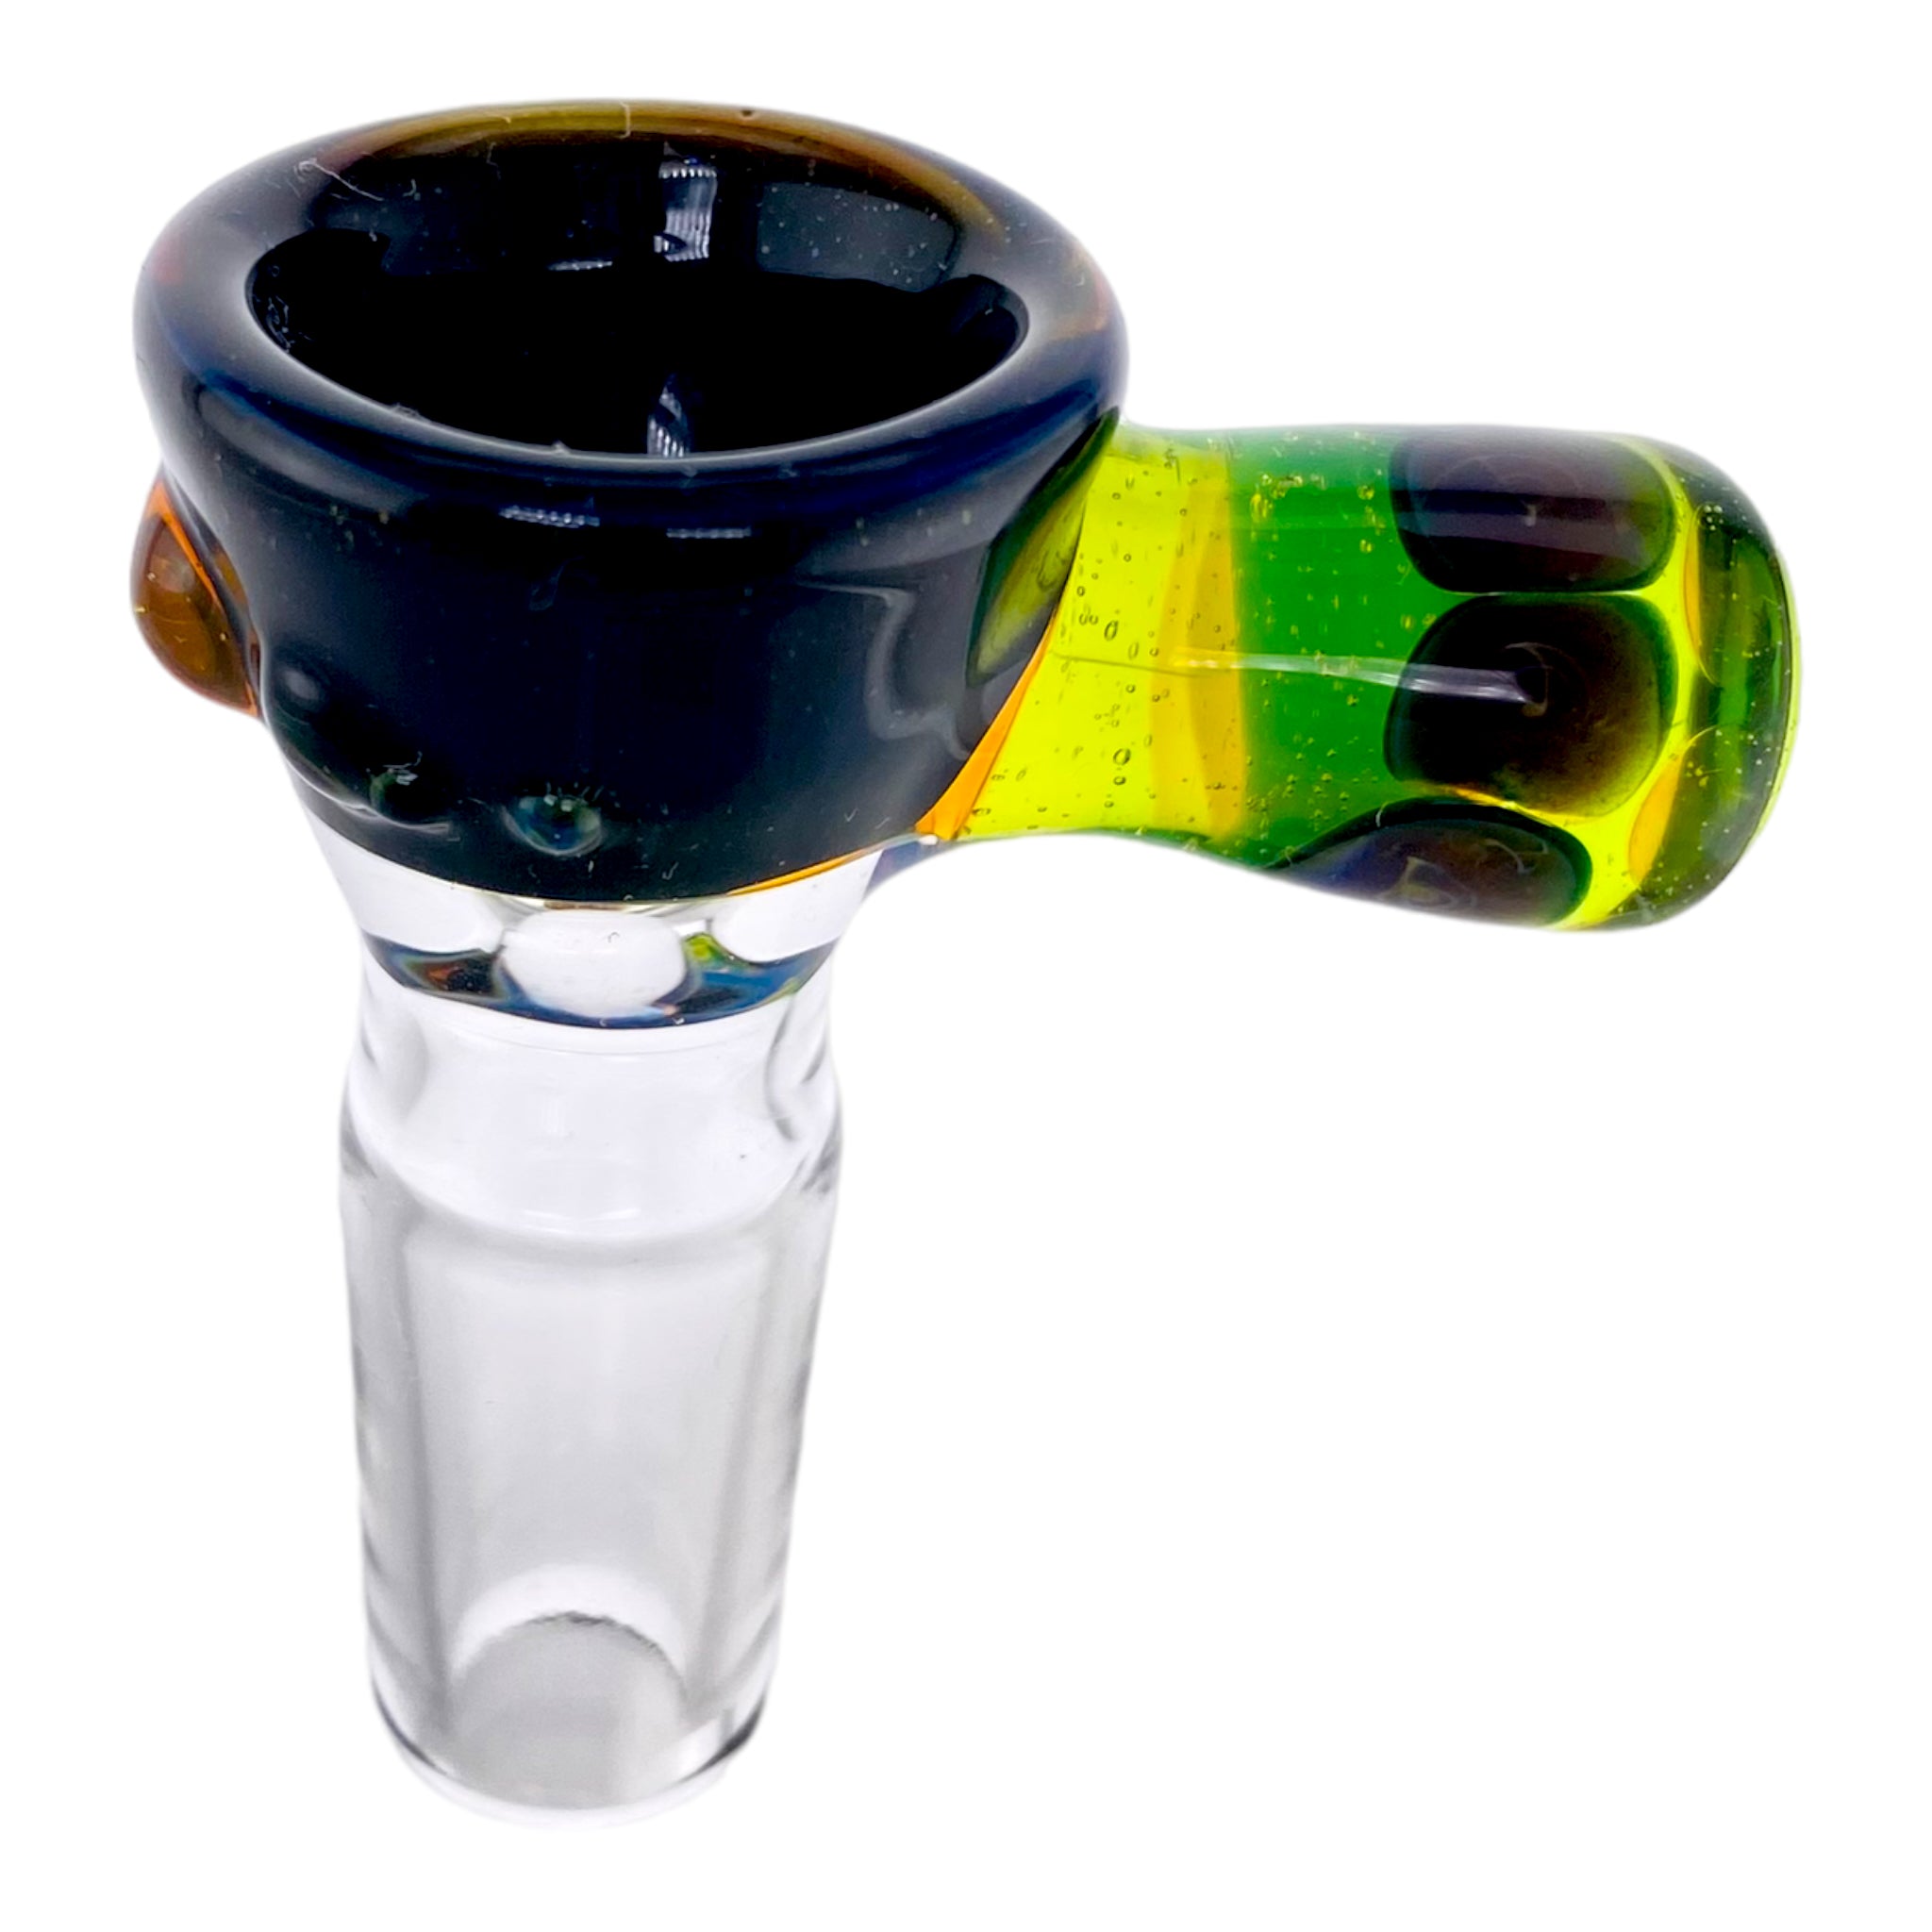 Arko Glass - 14mm Flower Bowl - Black With Green Dot Stack Handle